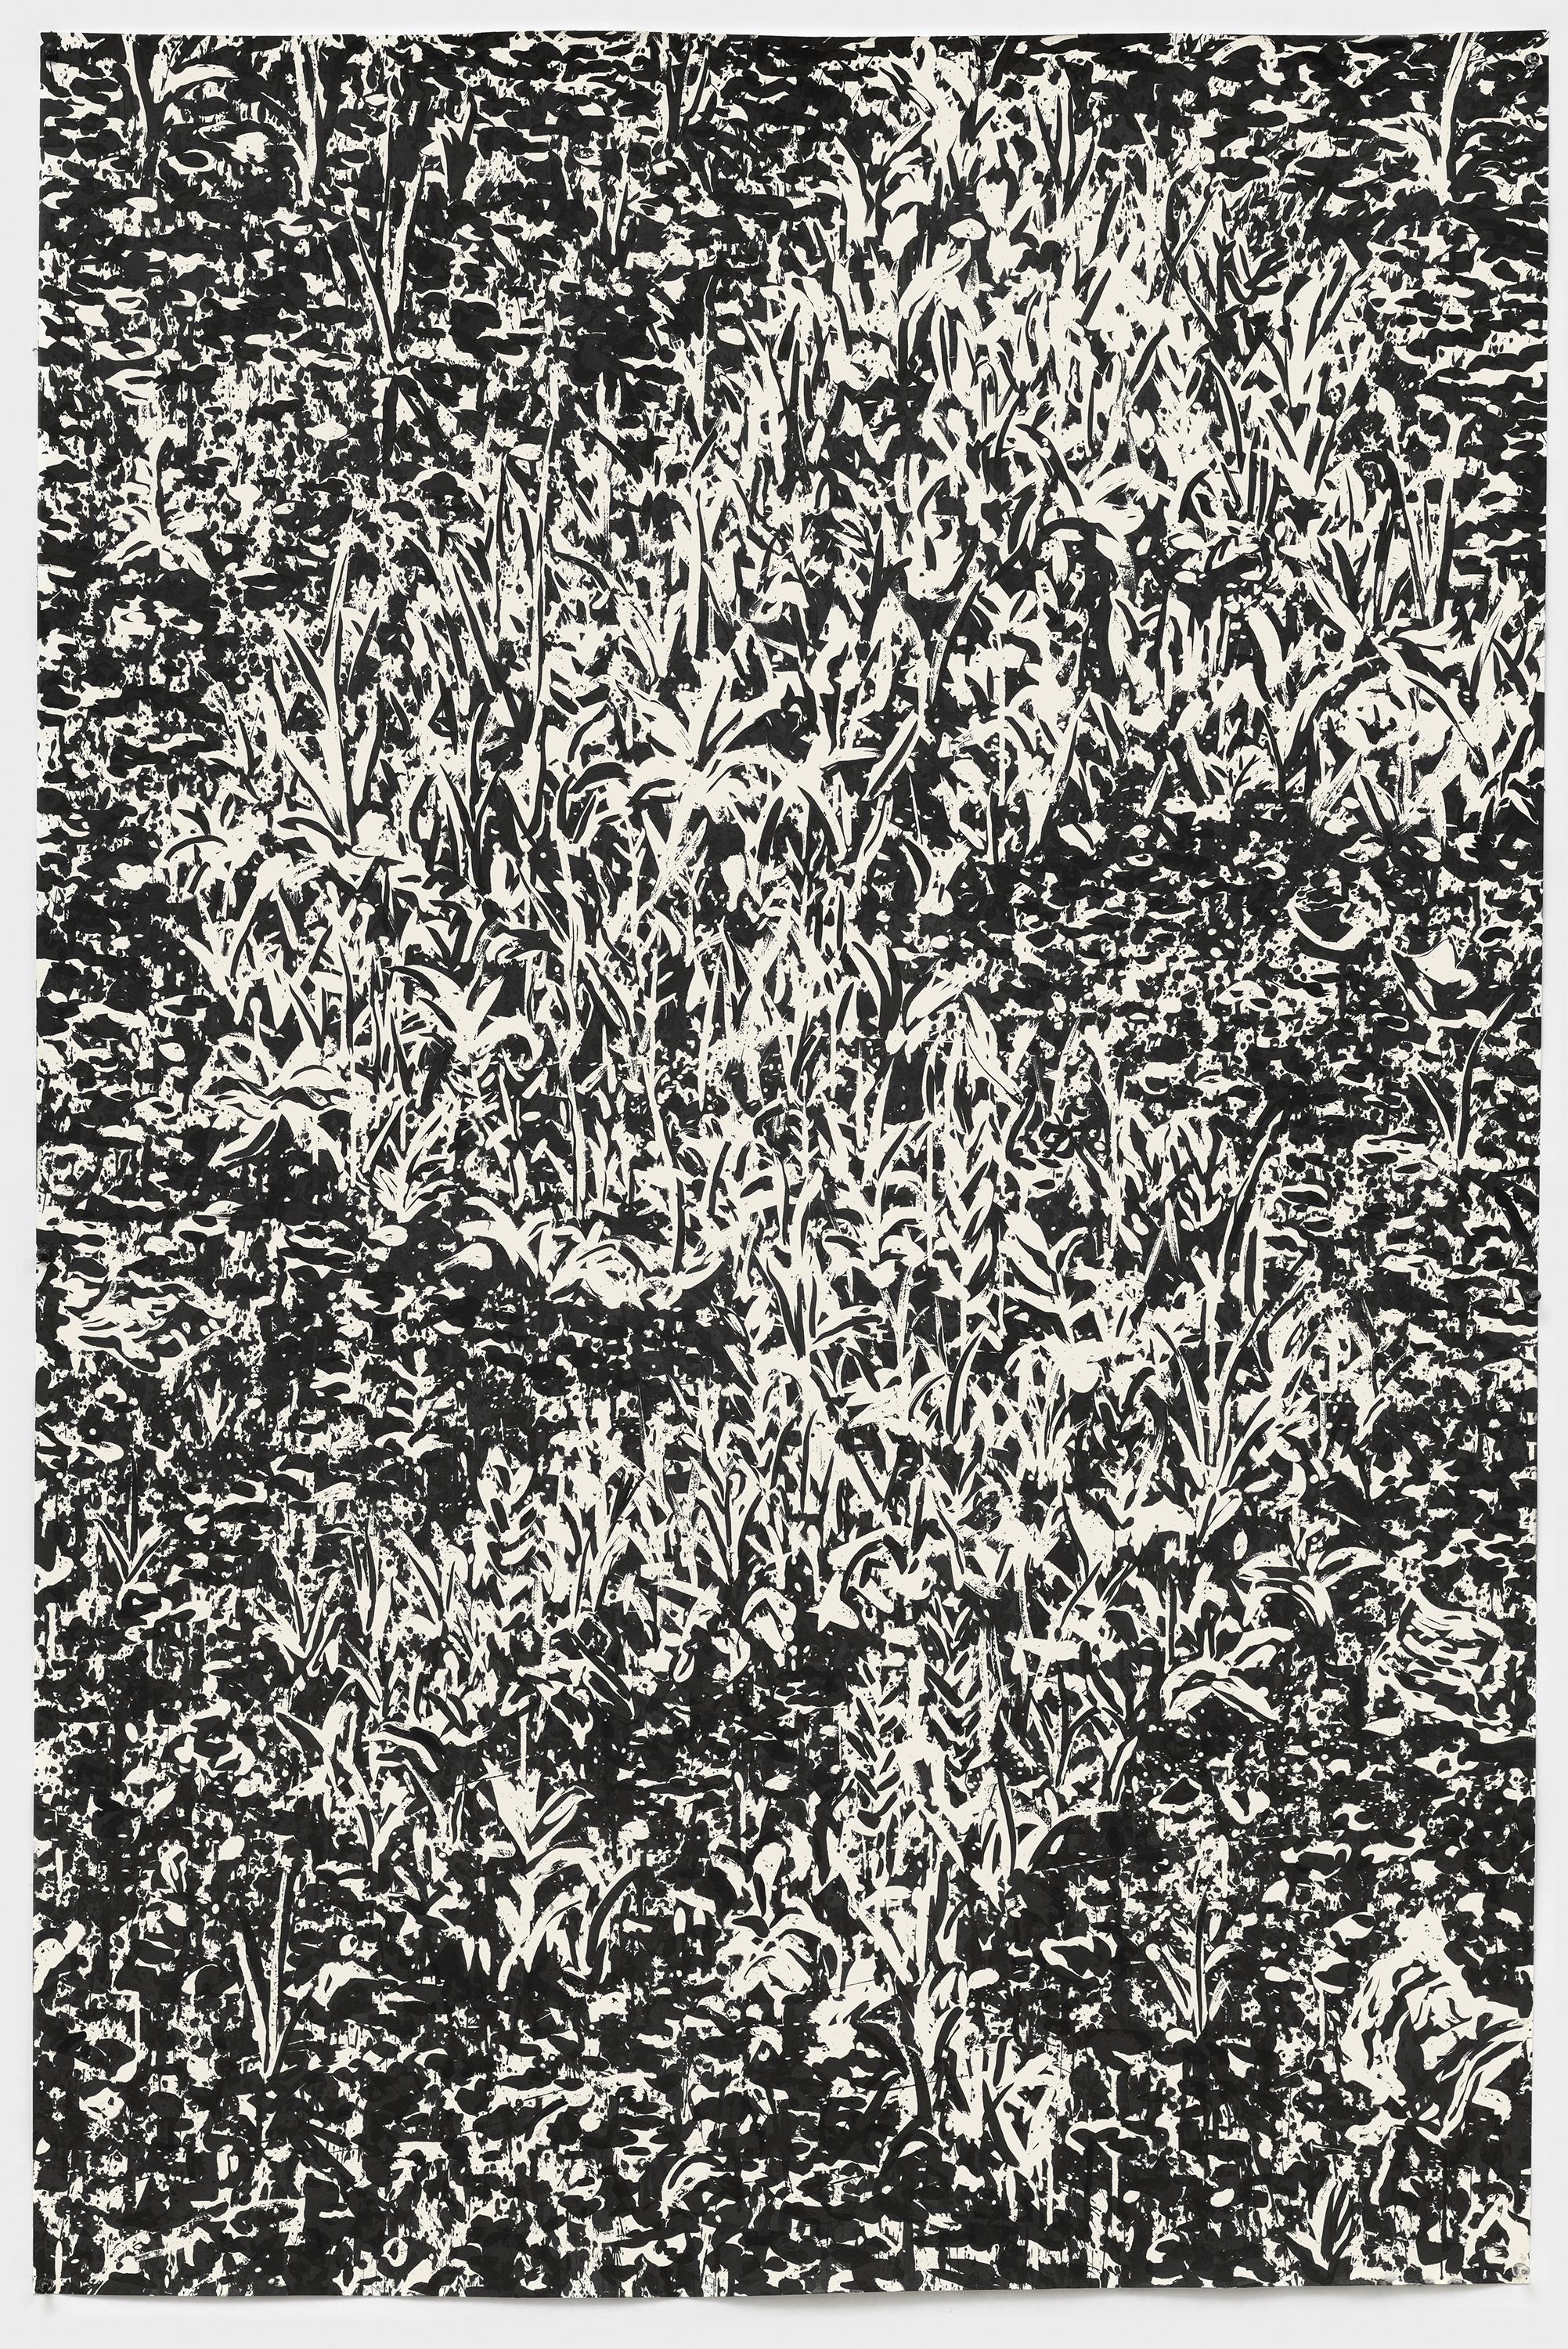 Sleeper, 2018 is a large scale ink on paper painting by American-born, New York-based artist Tom Costa.
54 x 36 in.

Artist's Statement: 
I grew up in the foothills of the Blue Ridge Mountains, and spent my childhood exploring wilderness and the